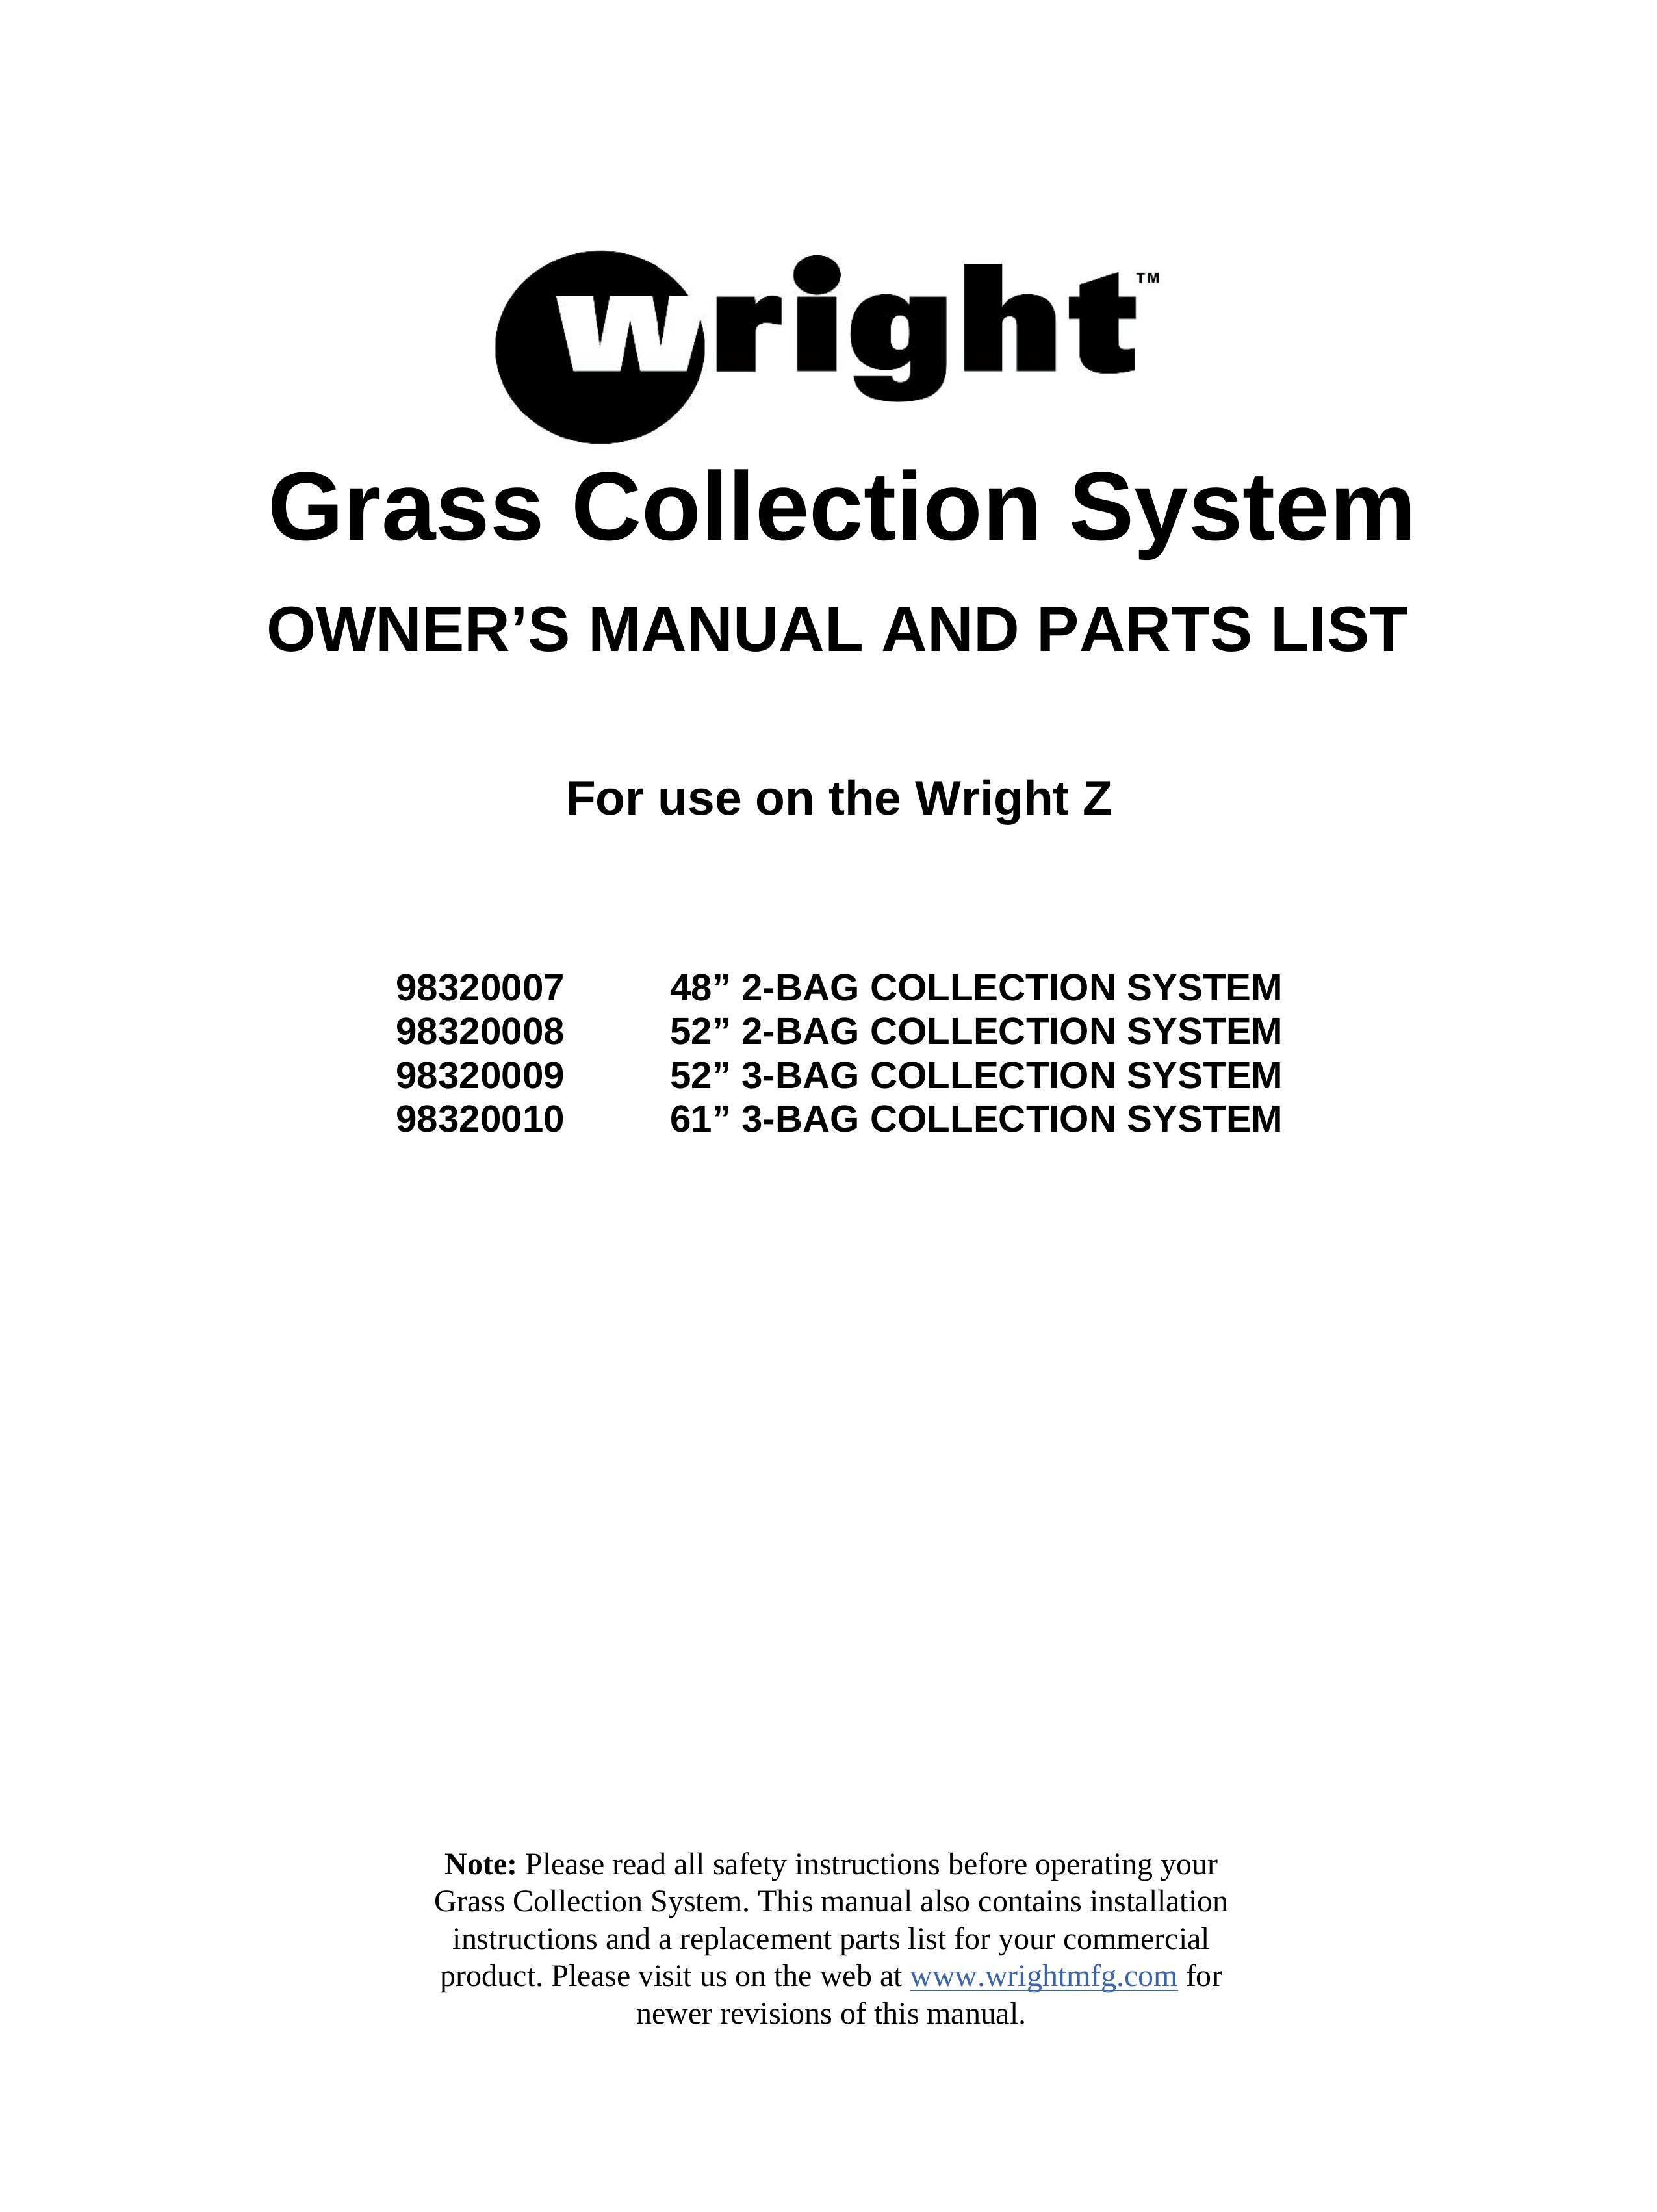 Wright Manufacturing 98320010 Lawn Mower Accessory User Manual